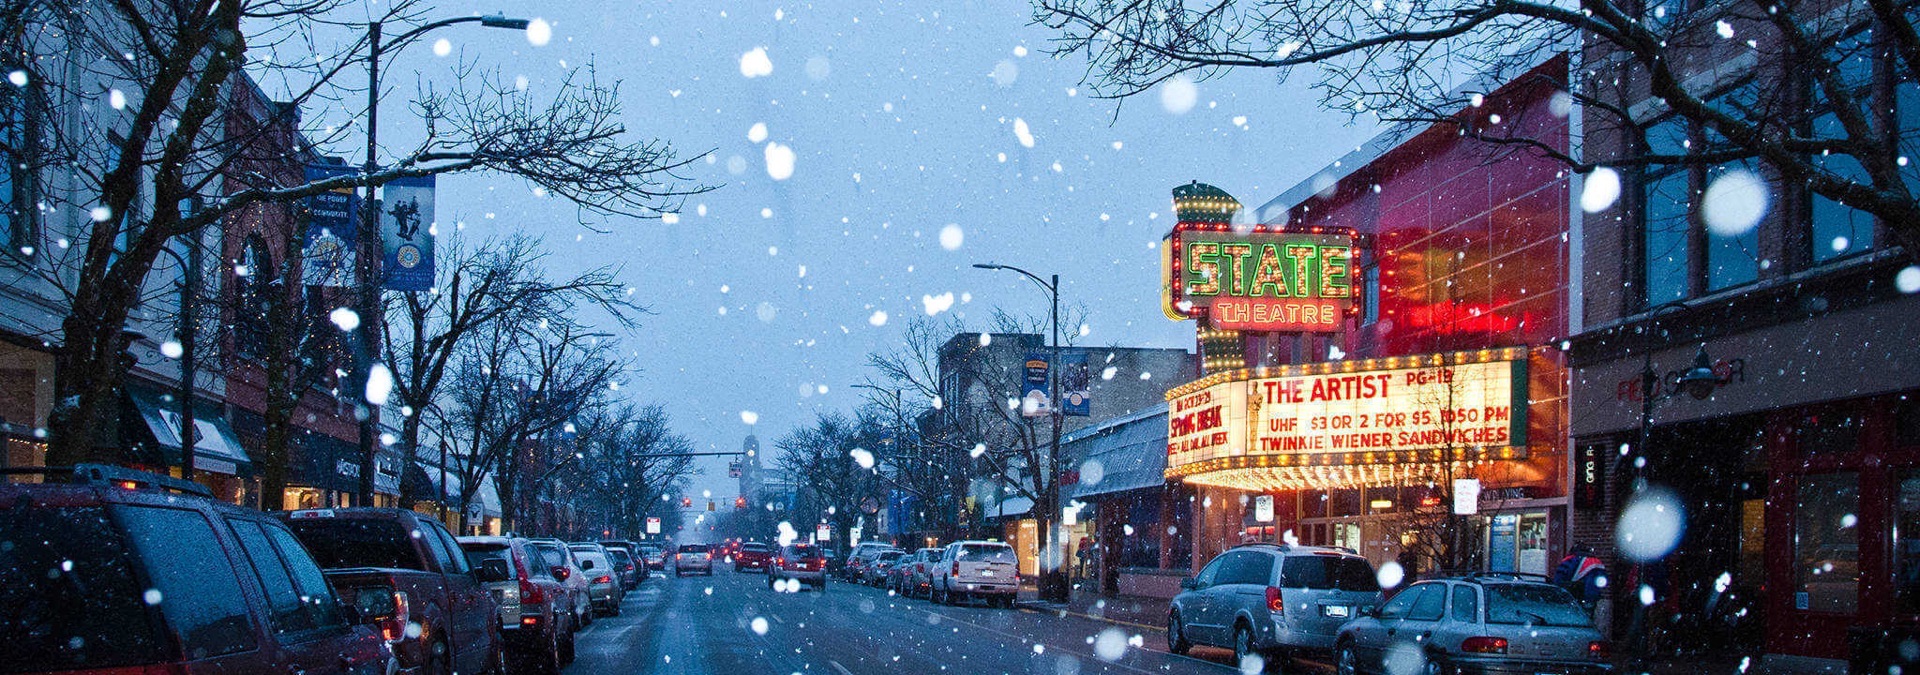 Downtown Traverse City in winter